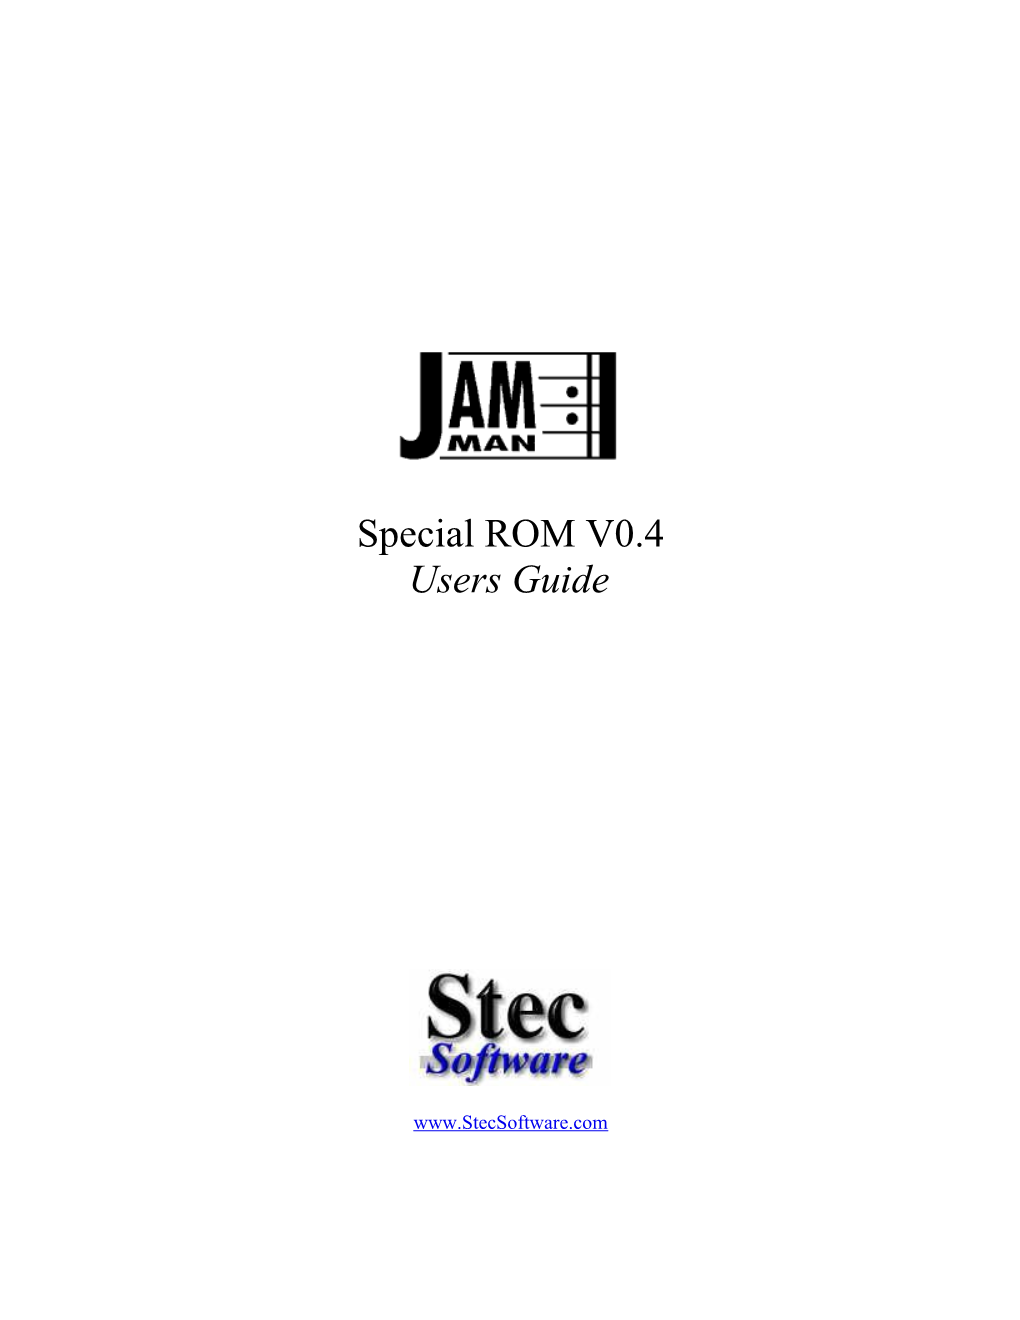 Stec Software Jamman Special ROM V0.4 Users Guide11/20/18